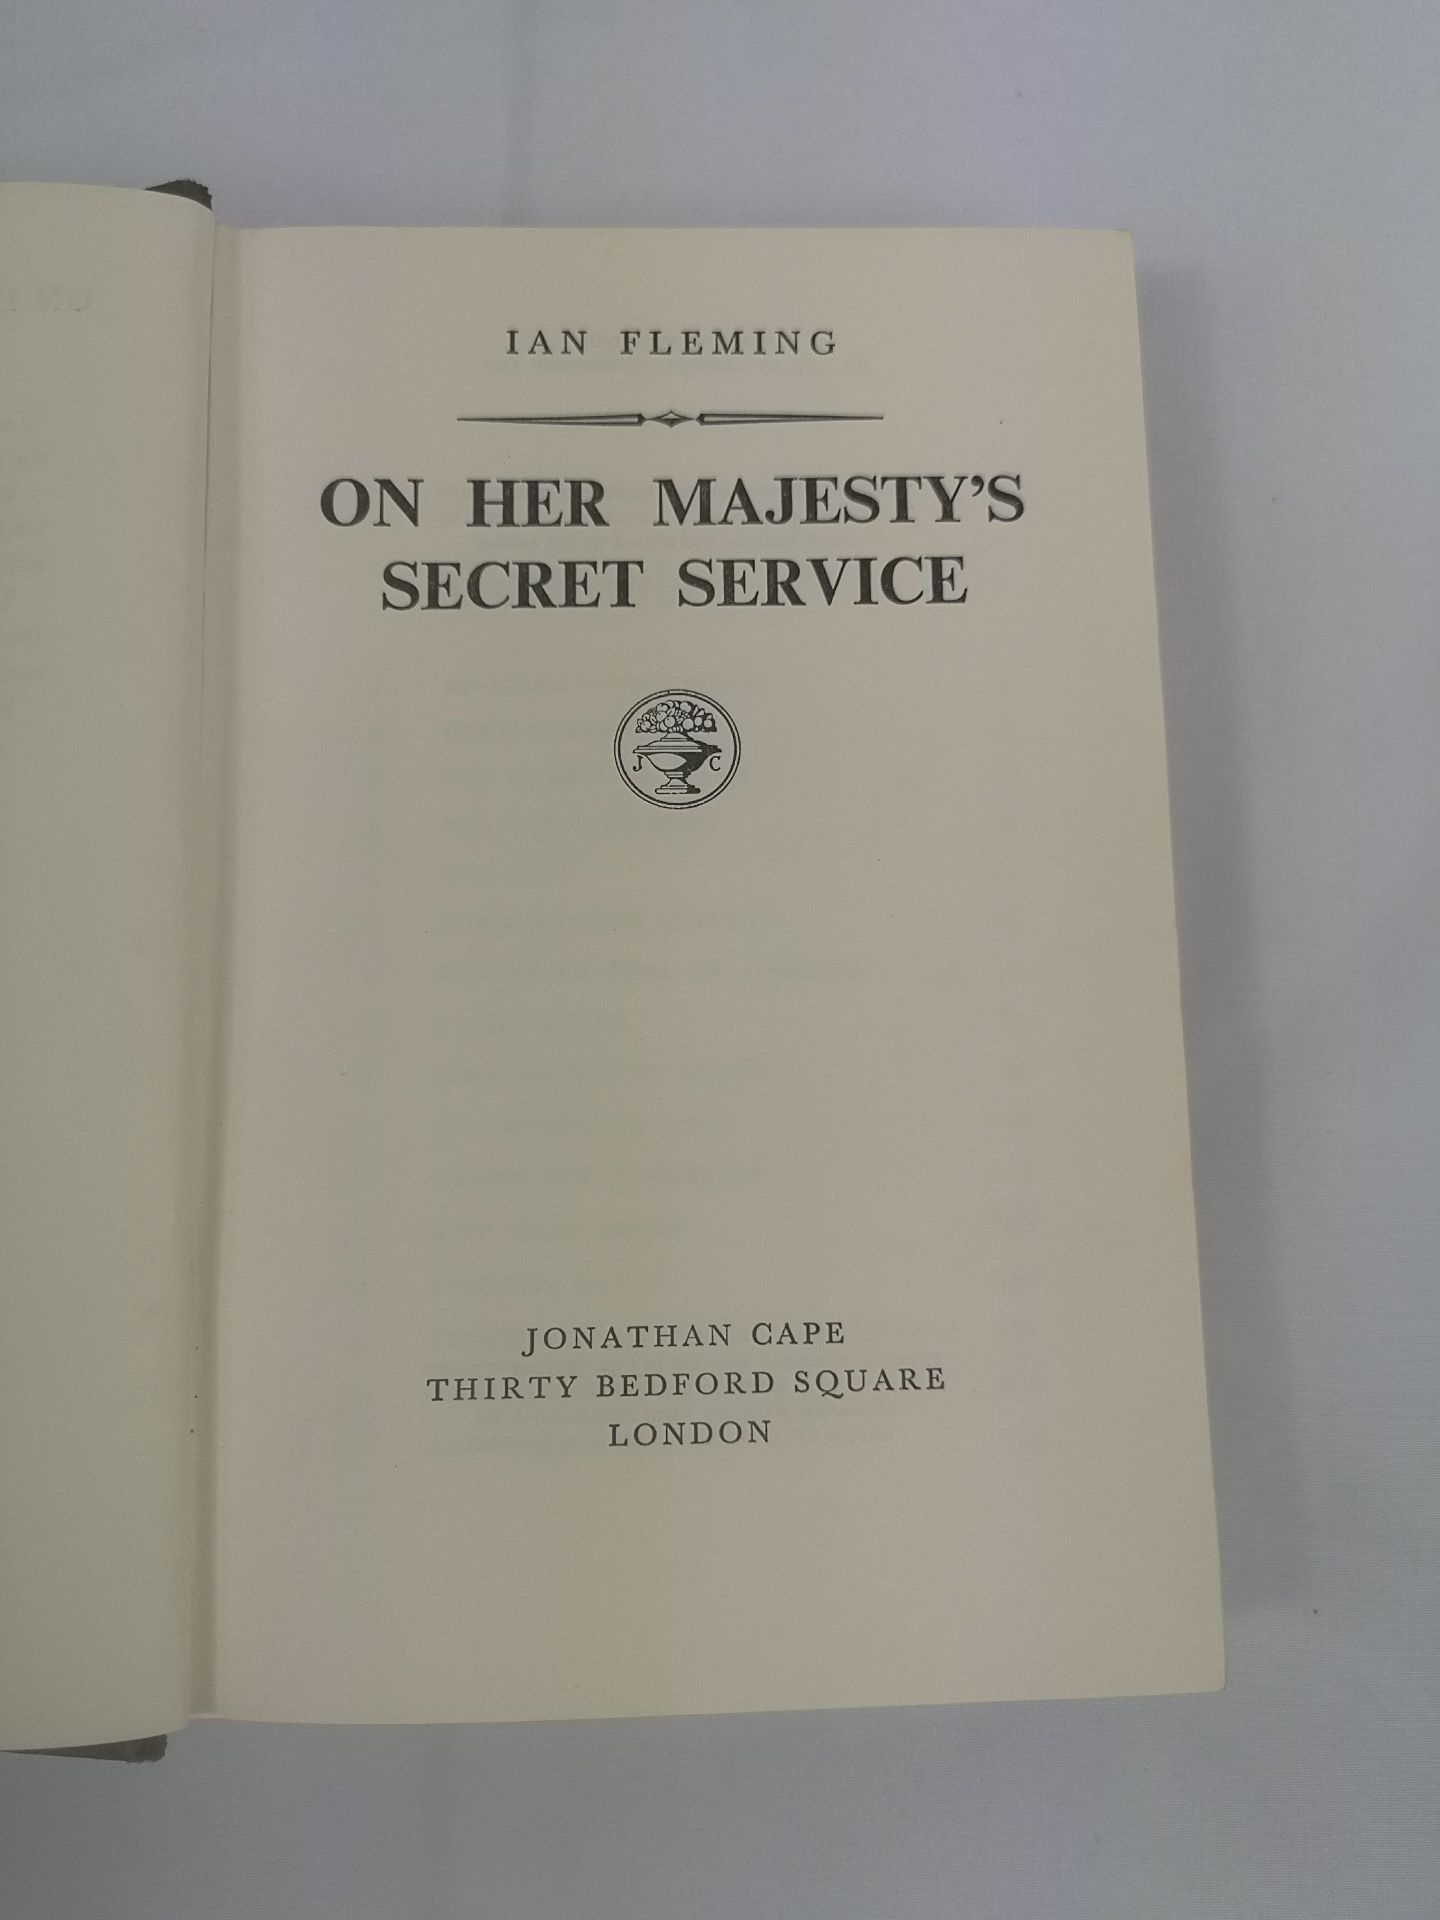 James Bond On Her Majesty's Secret Service, Ian Fleming, first edition in protective film sleeve. - Bild 3 aus 5